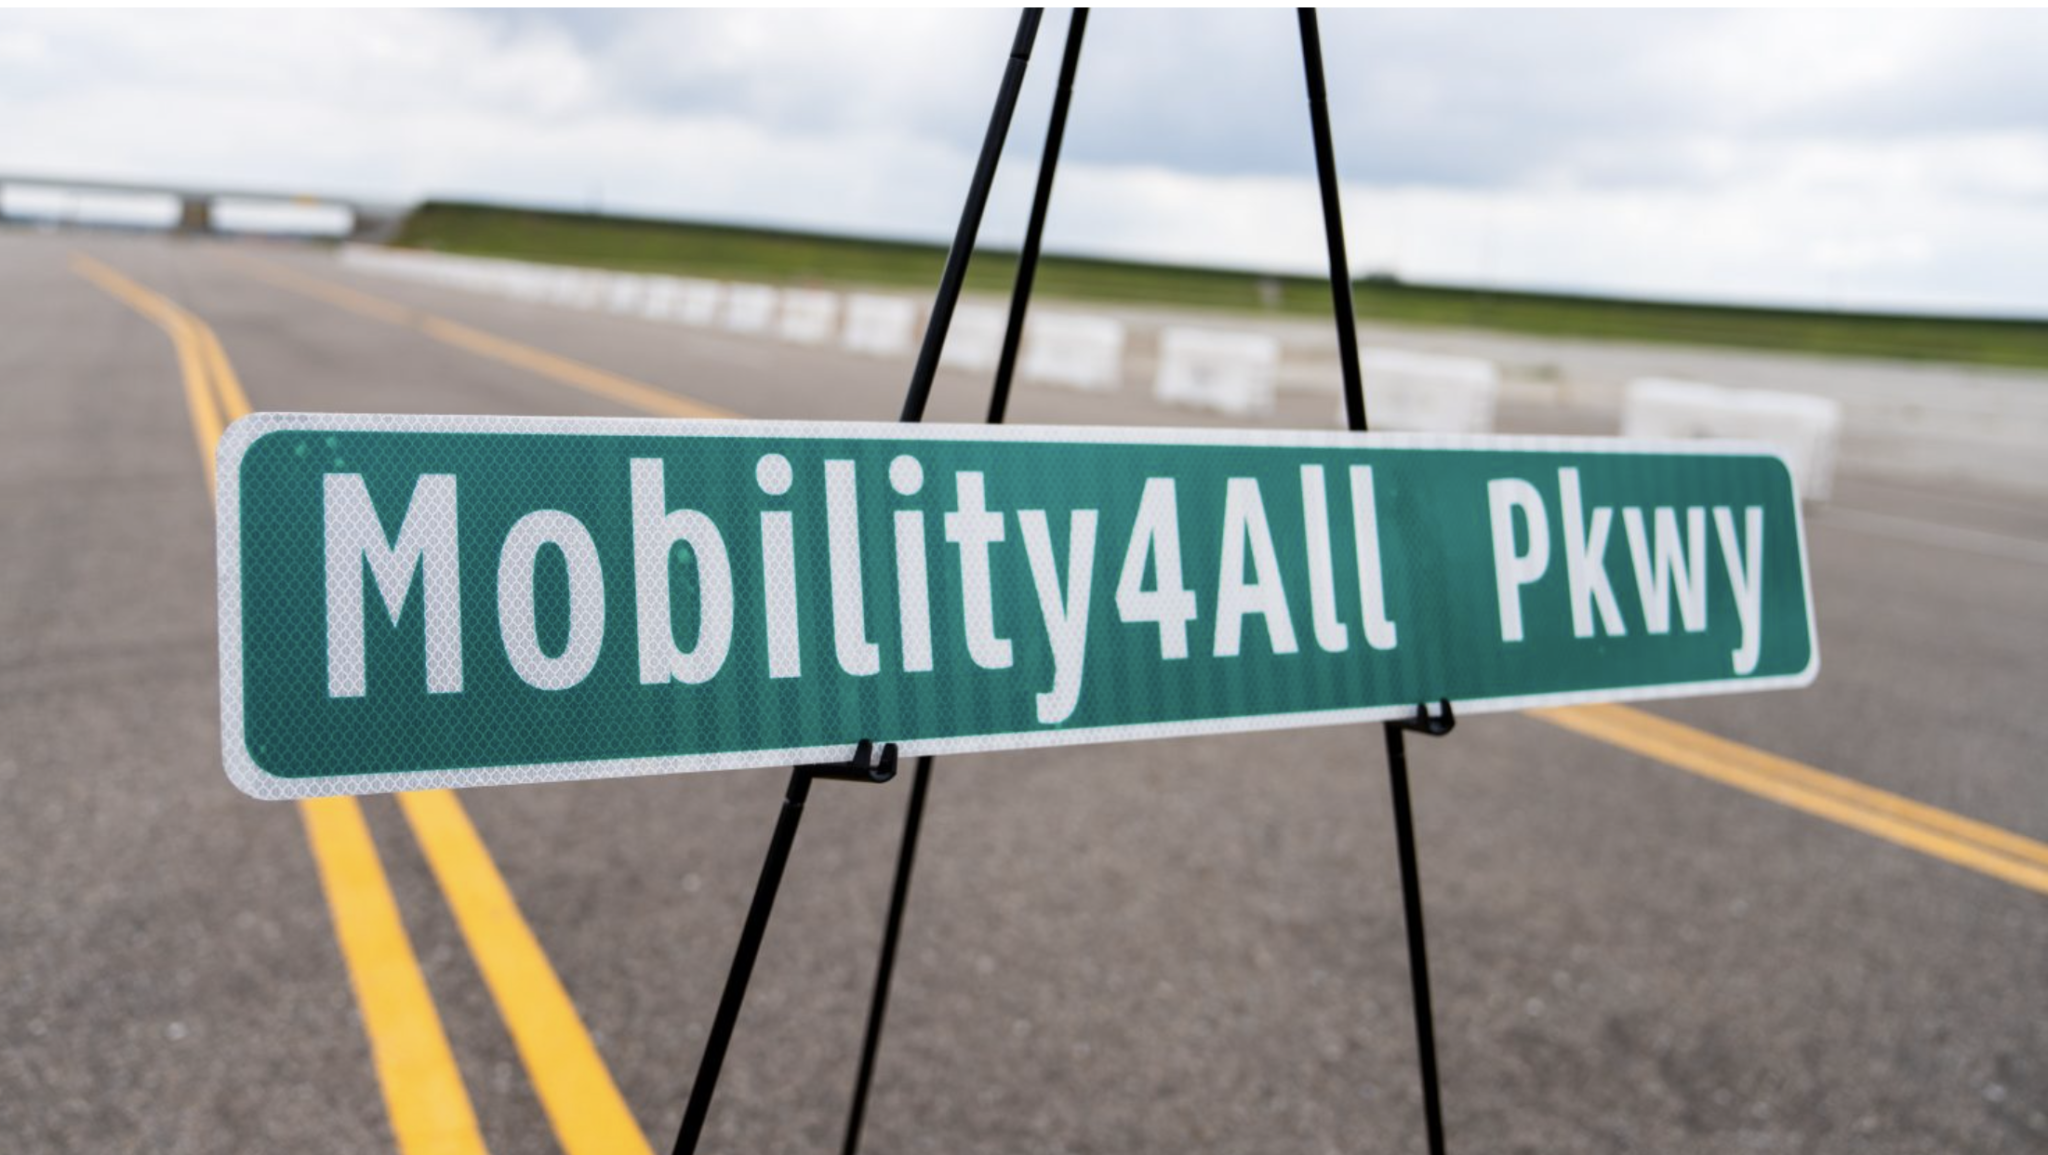 Mobility-4-All